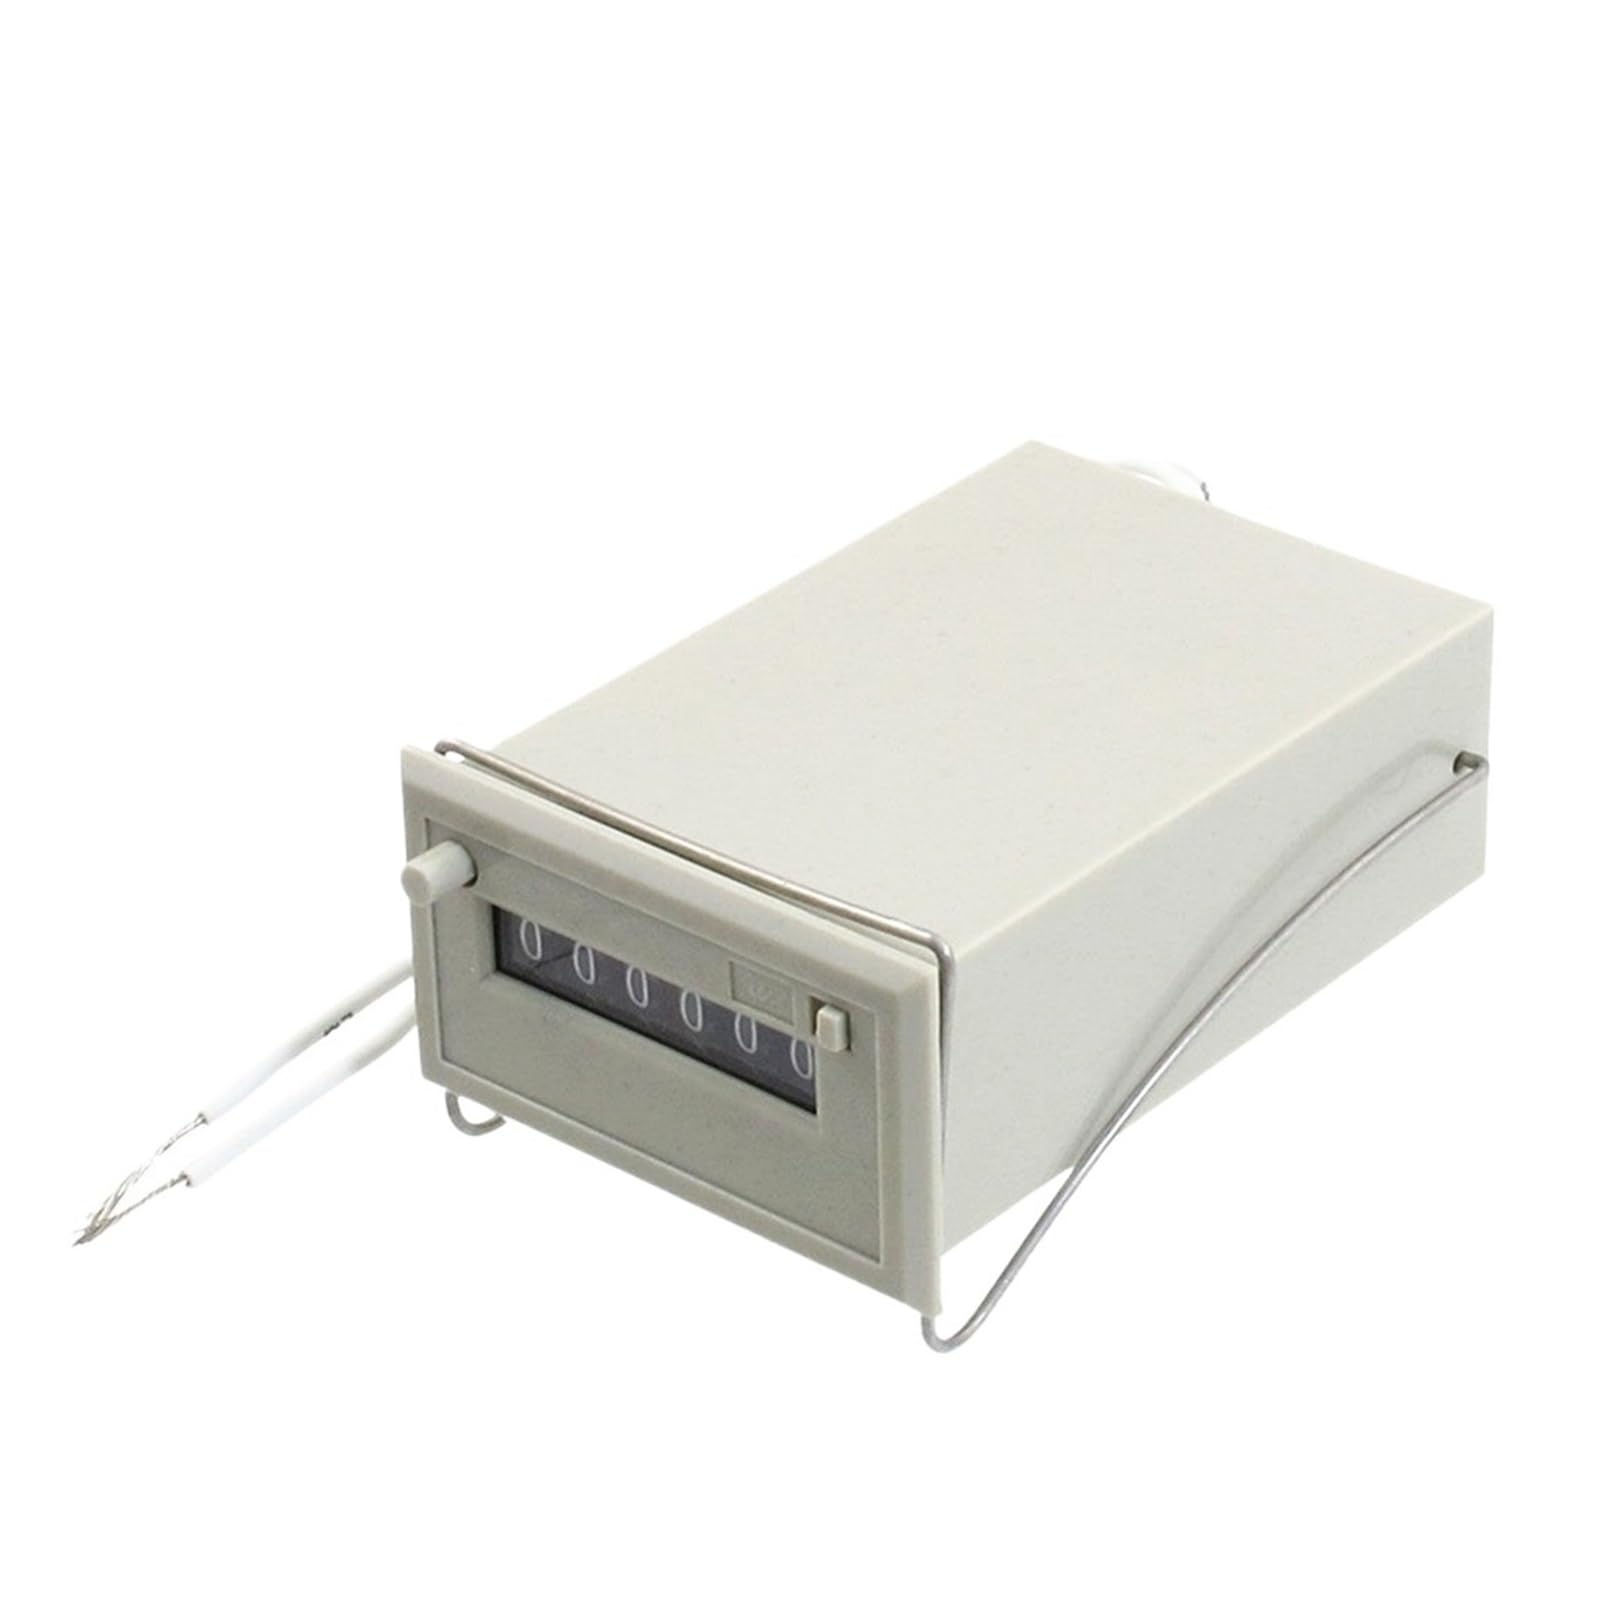 CSK6-DKW DC 24V AC 110V AC 220V 6 Digits 2 Wires Metal Support Lockable Electronmagnetic Counter NWPNLXEA(DC 24V) von NWPNLXEA